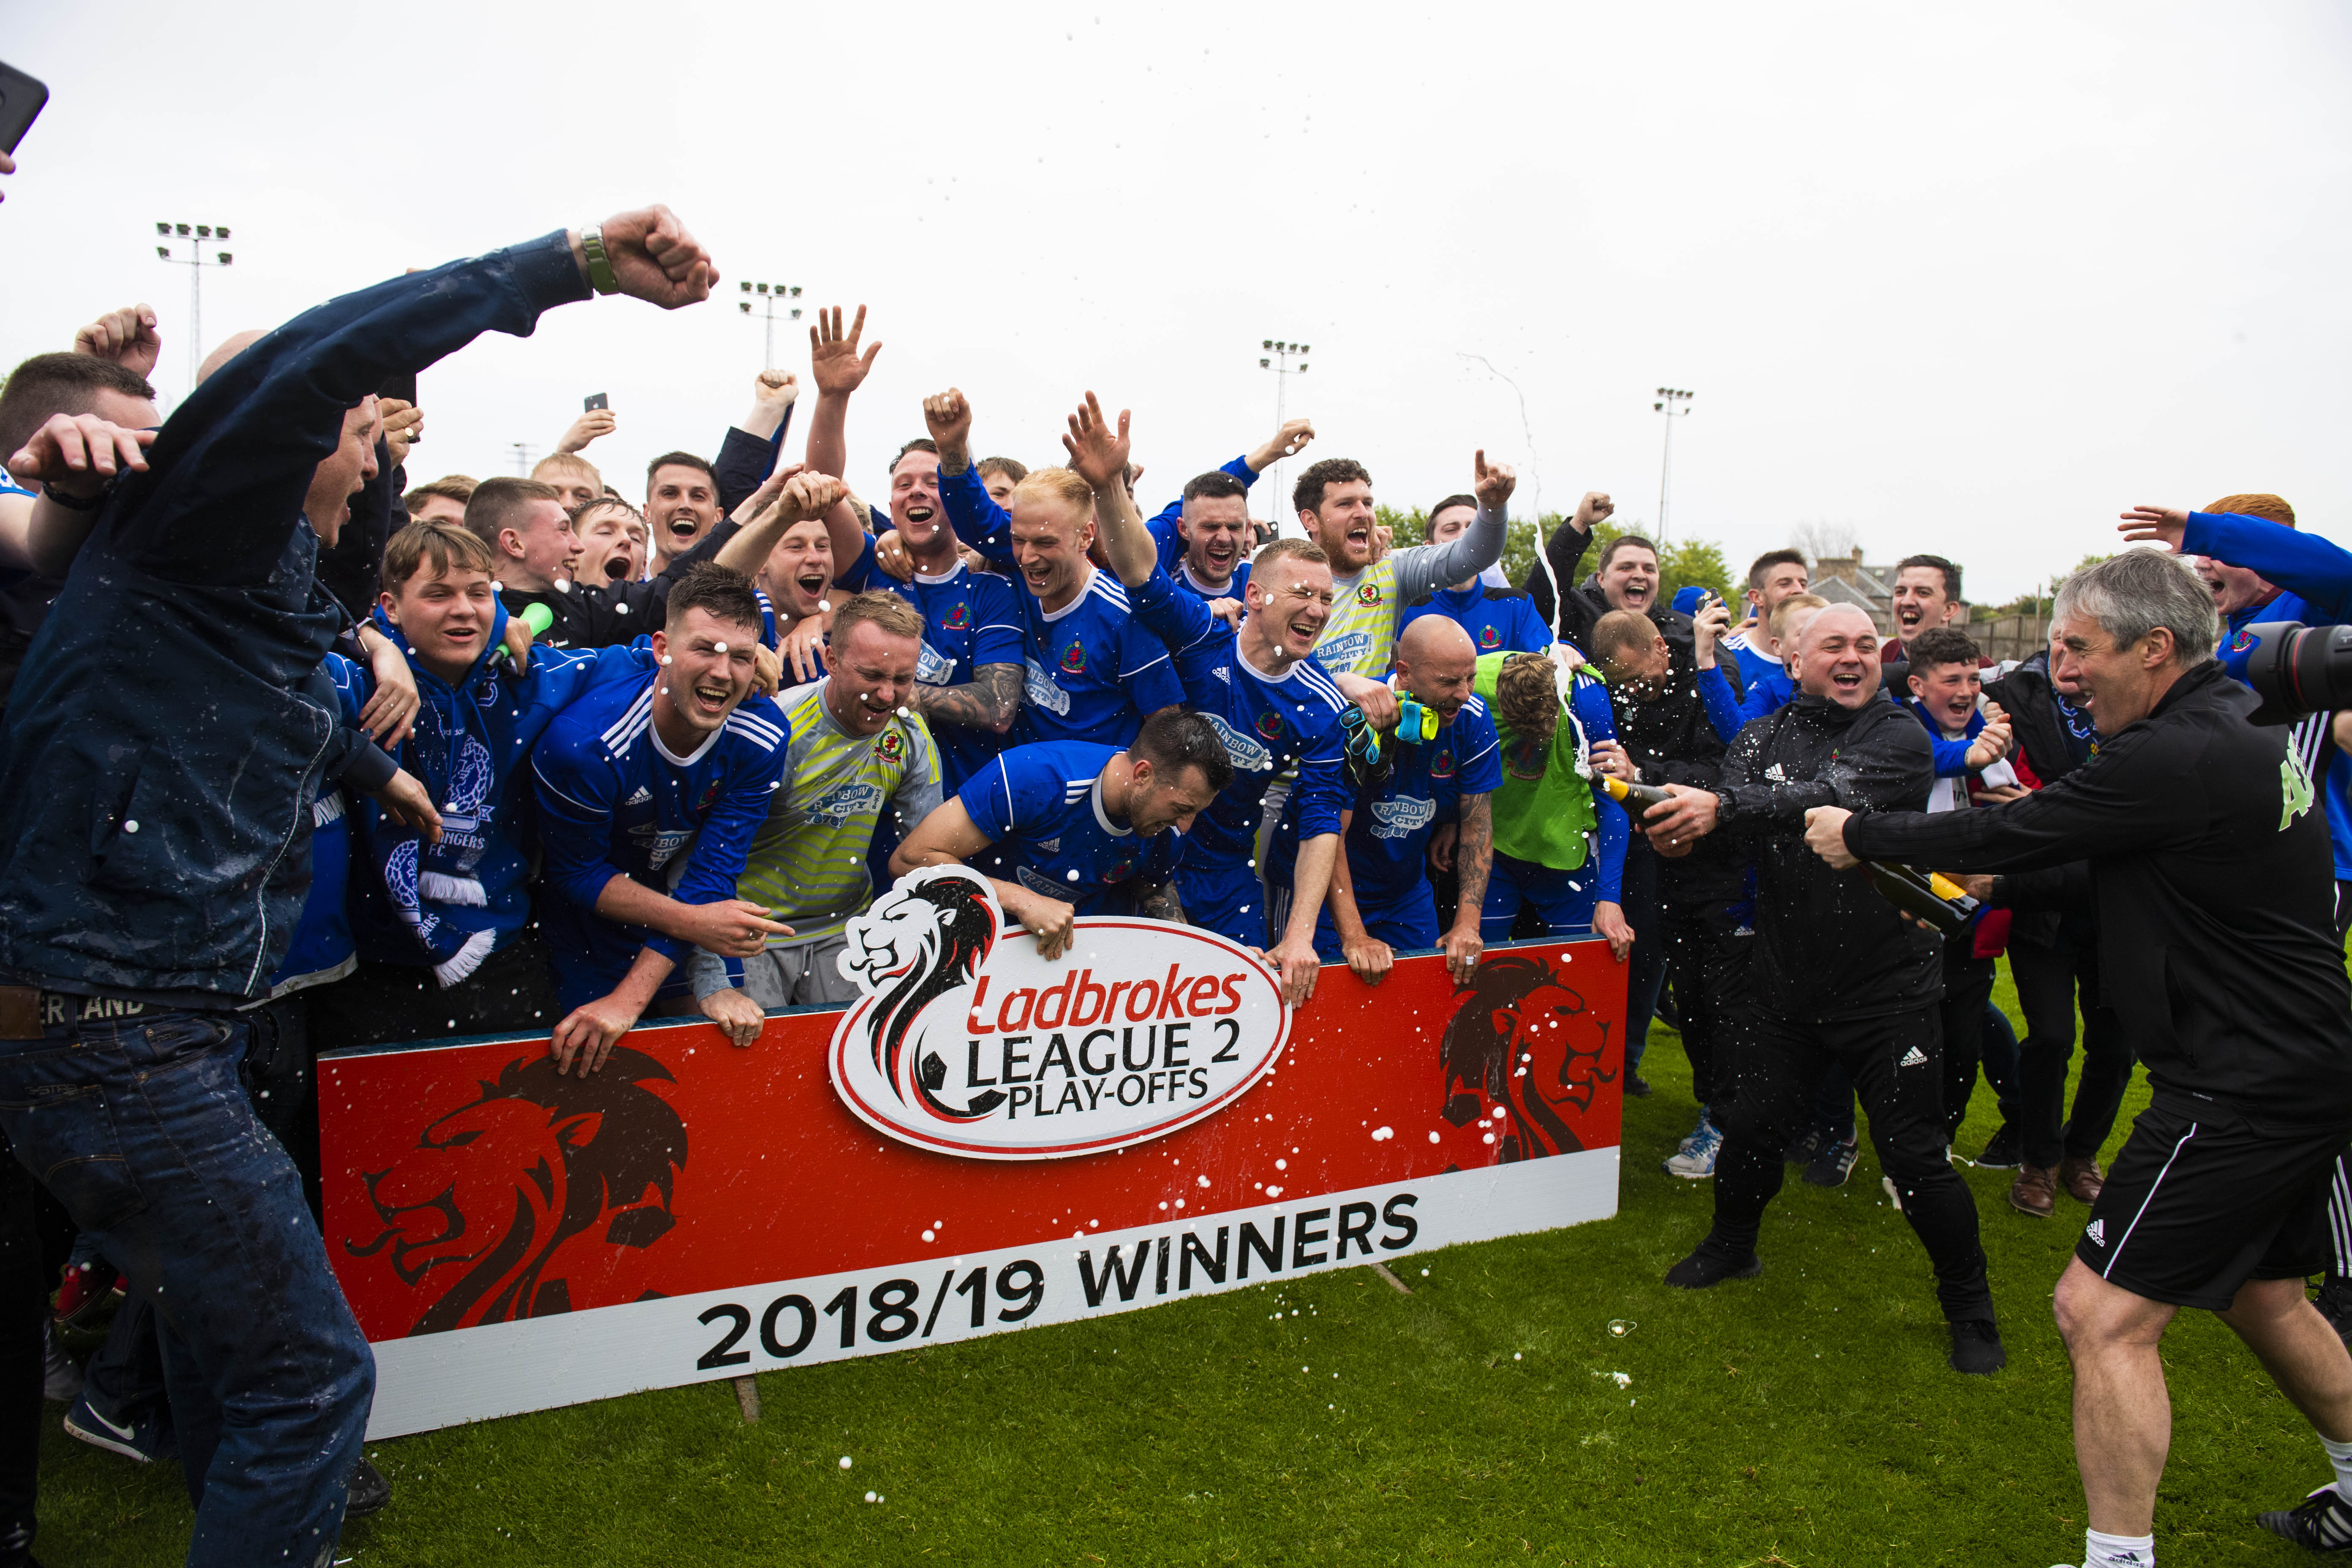 Cove Rangers celebrated becoming a League 2 side in May.